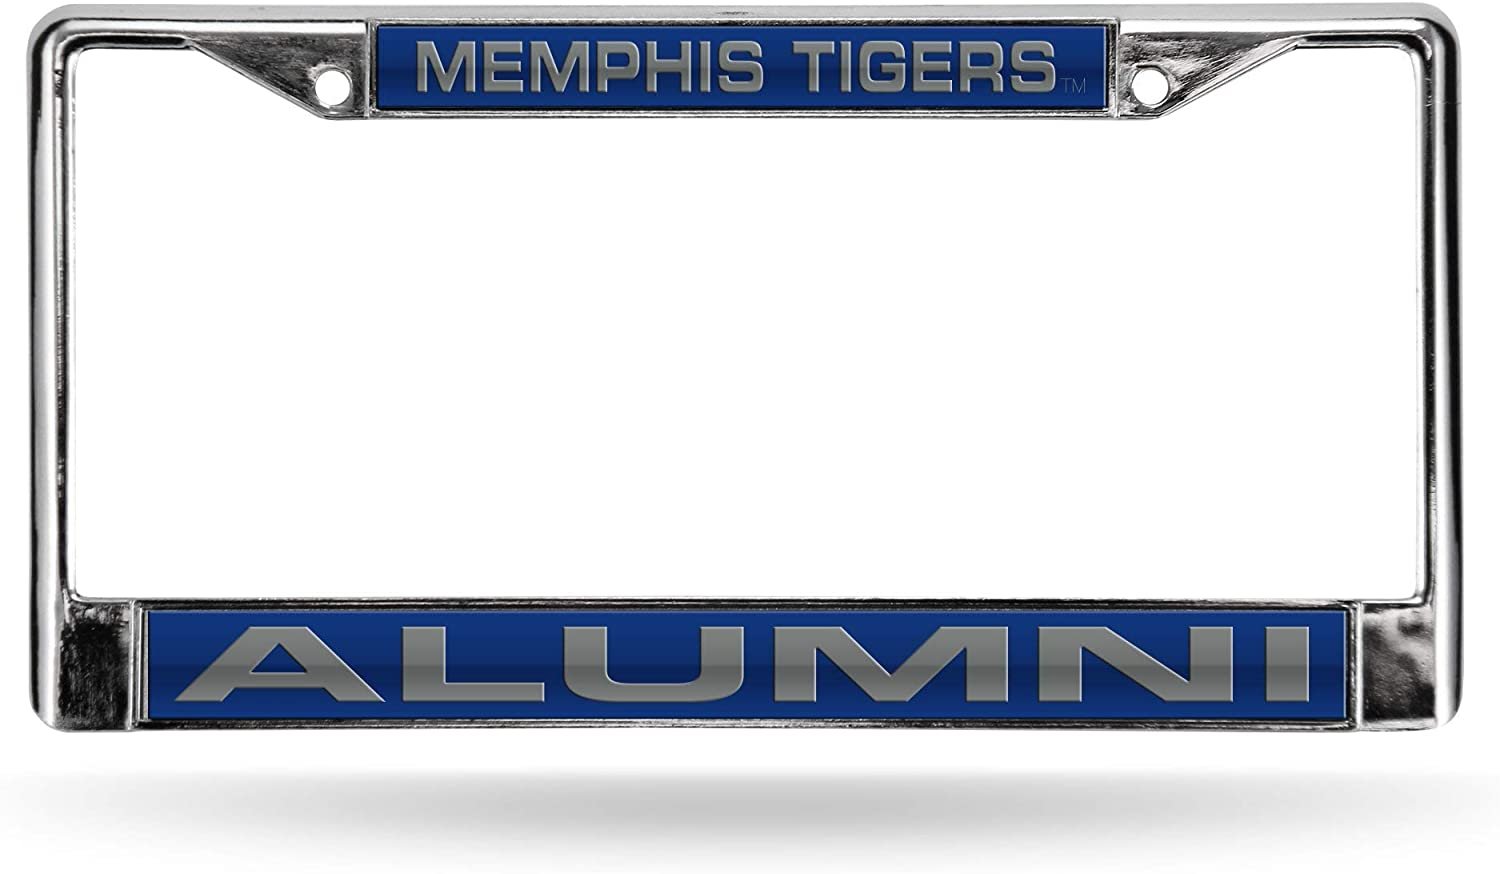 University of Memphis Tigers Metal License Plate Frame Chrome Tag Cover, Laser Acrylic Mirrored Inserts, 12x6 Inch